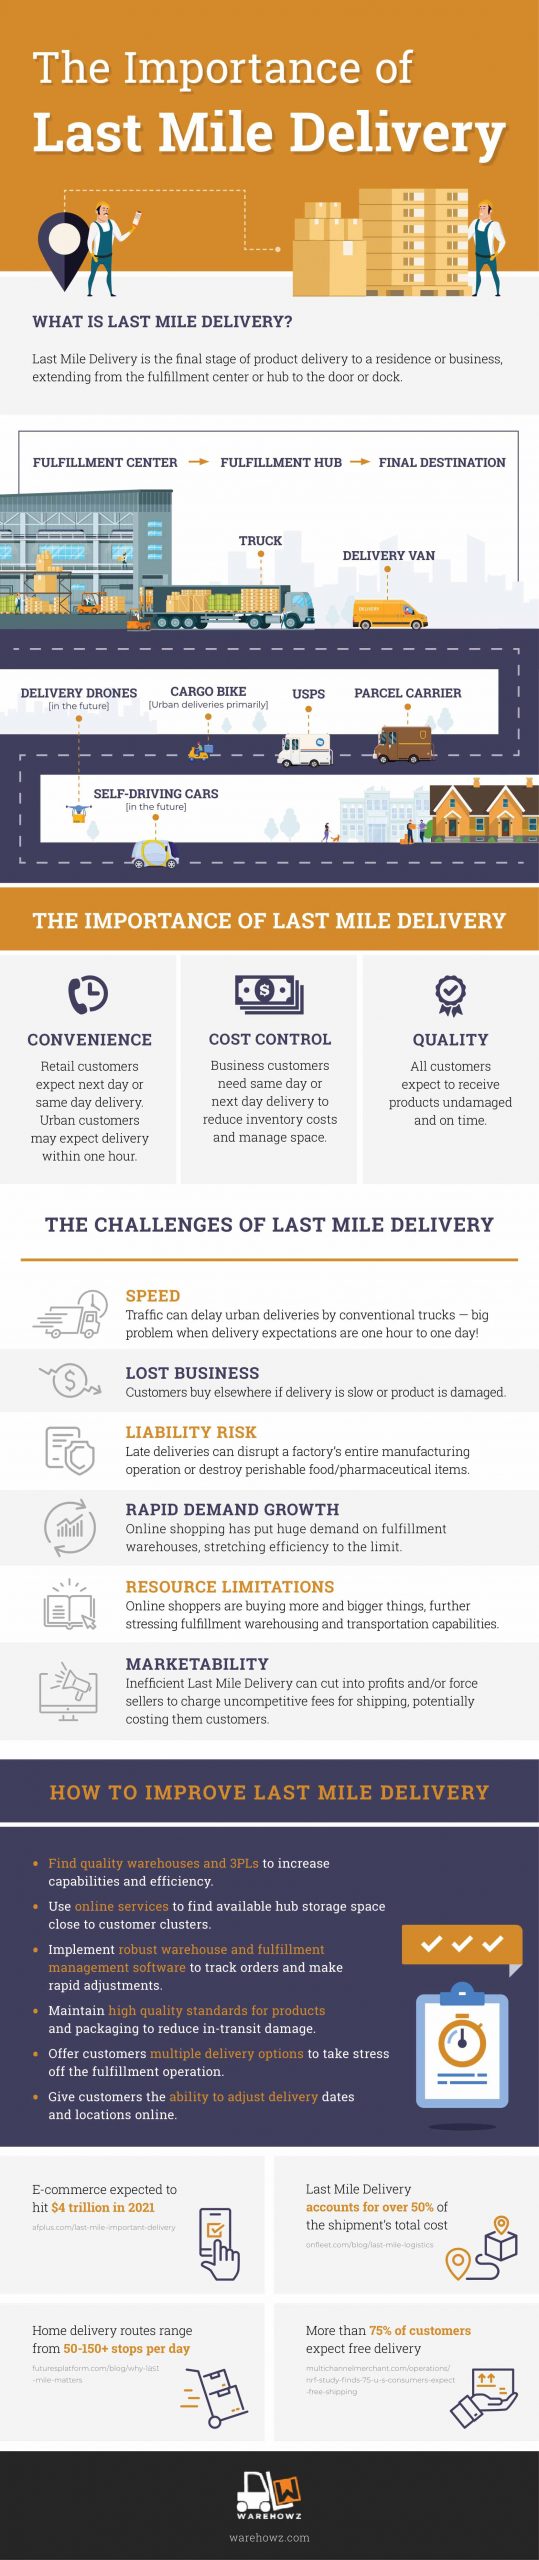 warehowz the importance of last mile delivery infographic